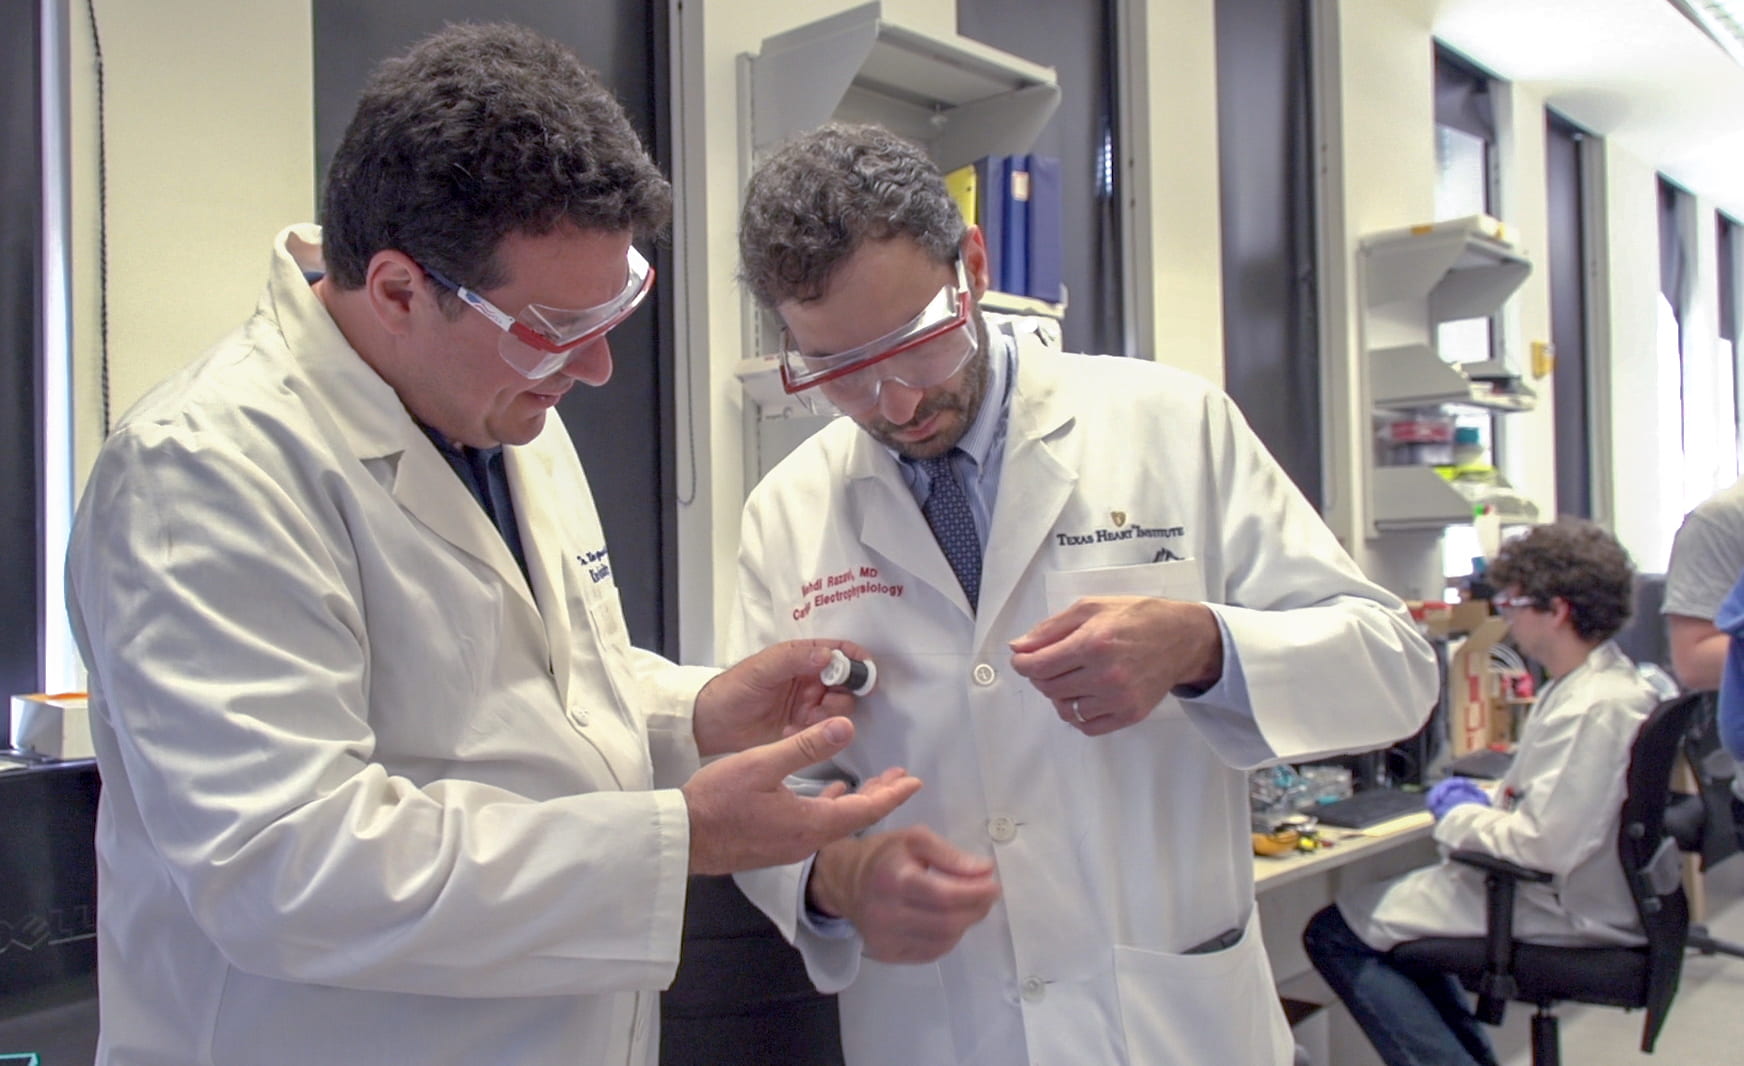 Rice University Professor Matteo Pasquali, left, and Dr. Mehdi Razavi of the Texas Heart Institute check a thread of carbon nanotube fiber invented in Pasquali's Rice lab. They are collaborating on a method to use the fibers as electrical bridges to restore conductivity to damaged hearts. (Credit: Texas Heart Institute)